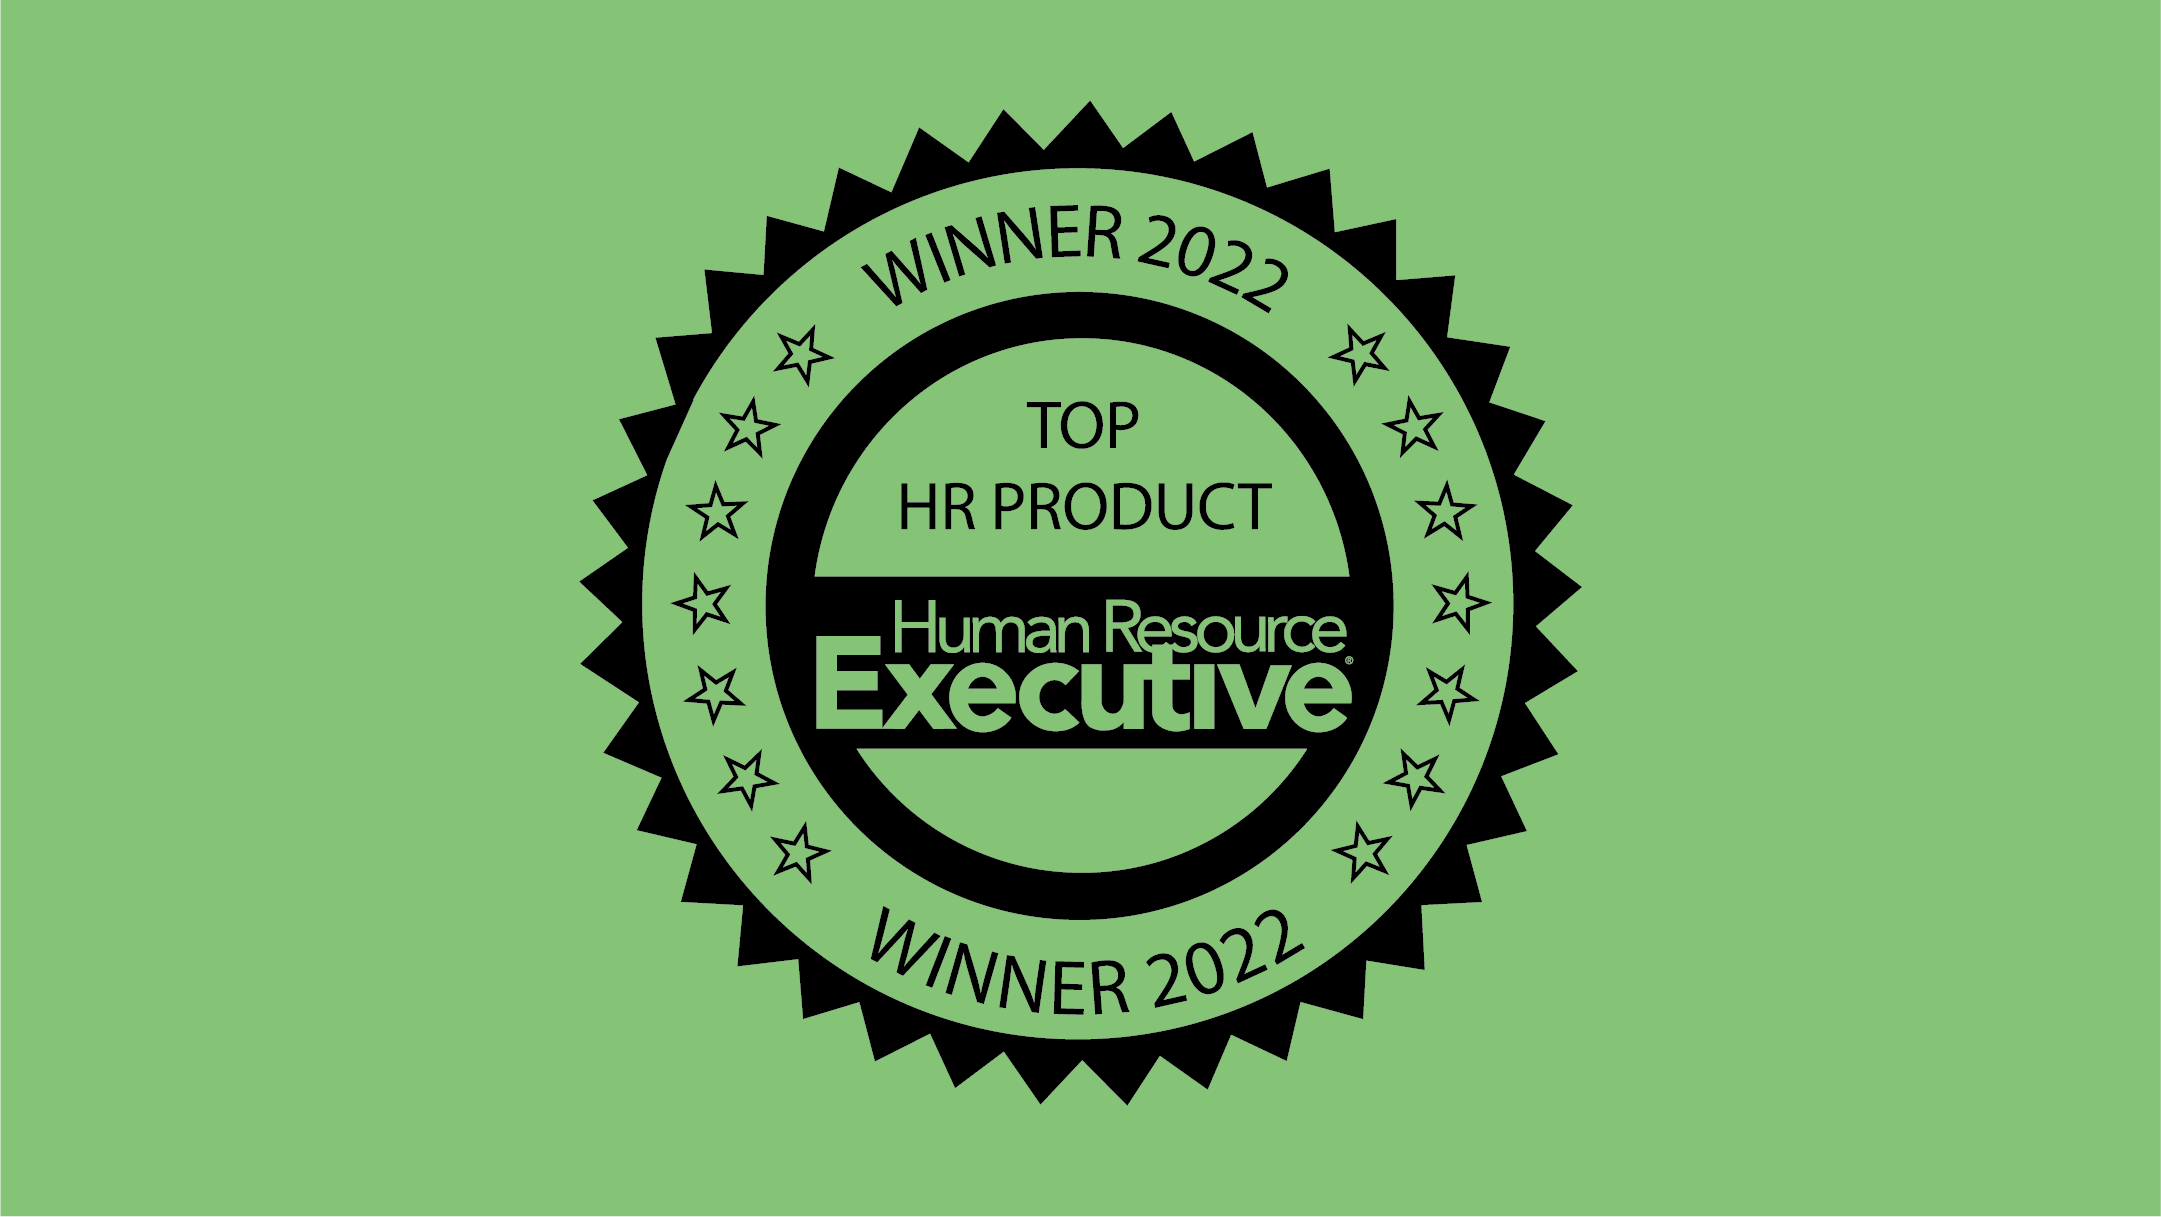 HR Executive Award 2022, Top Product of the Year